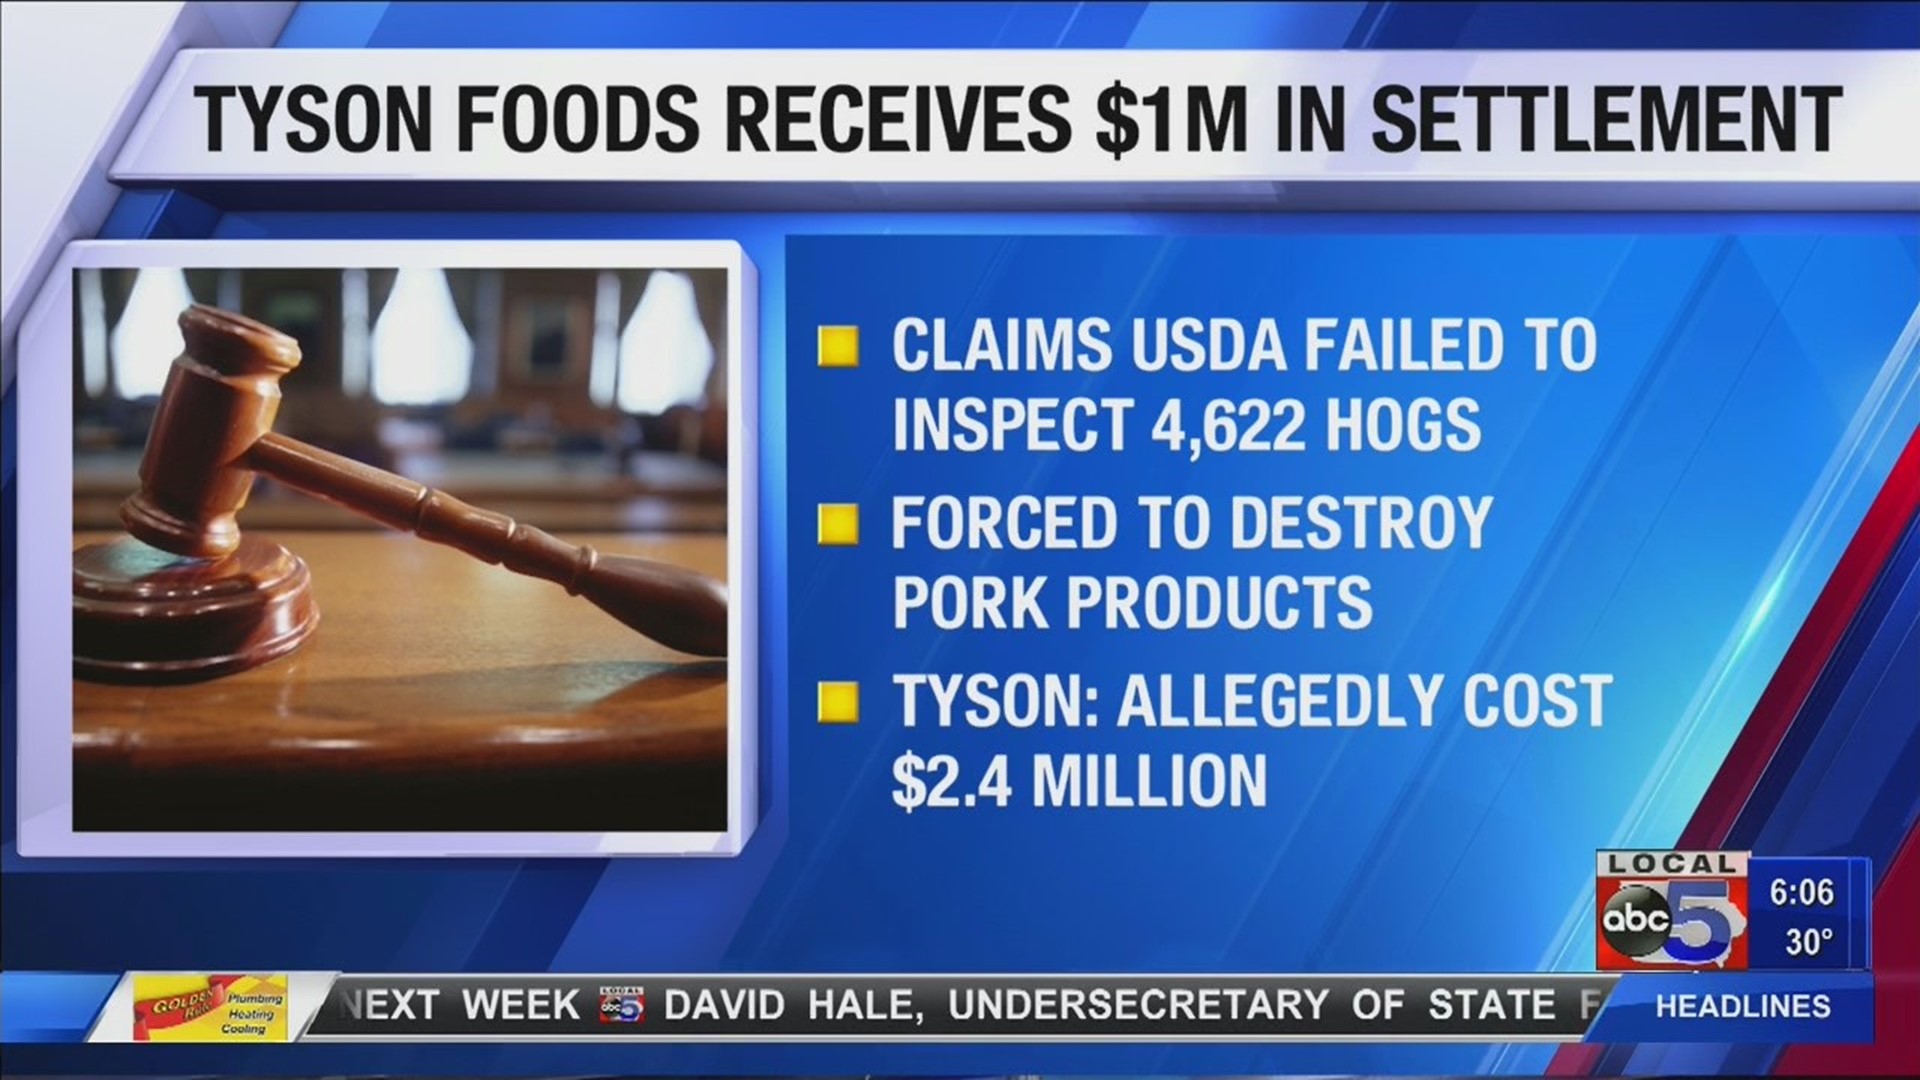 Tyson Foods reaches $1 million settlement with USDA over hog inspections